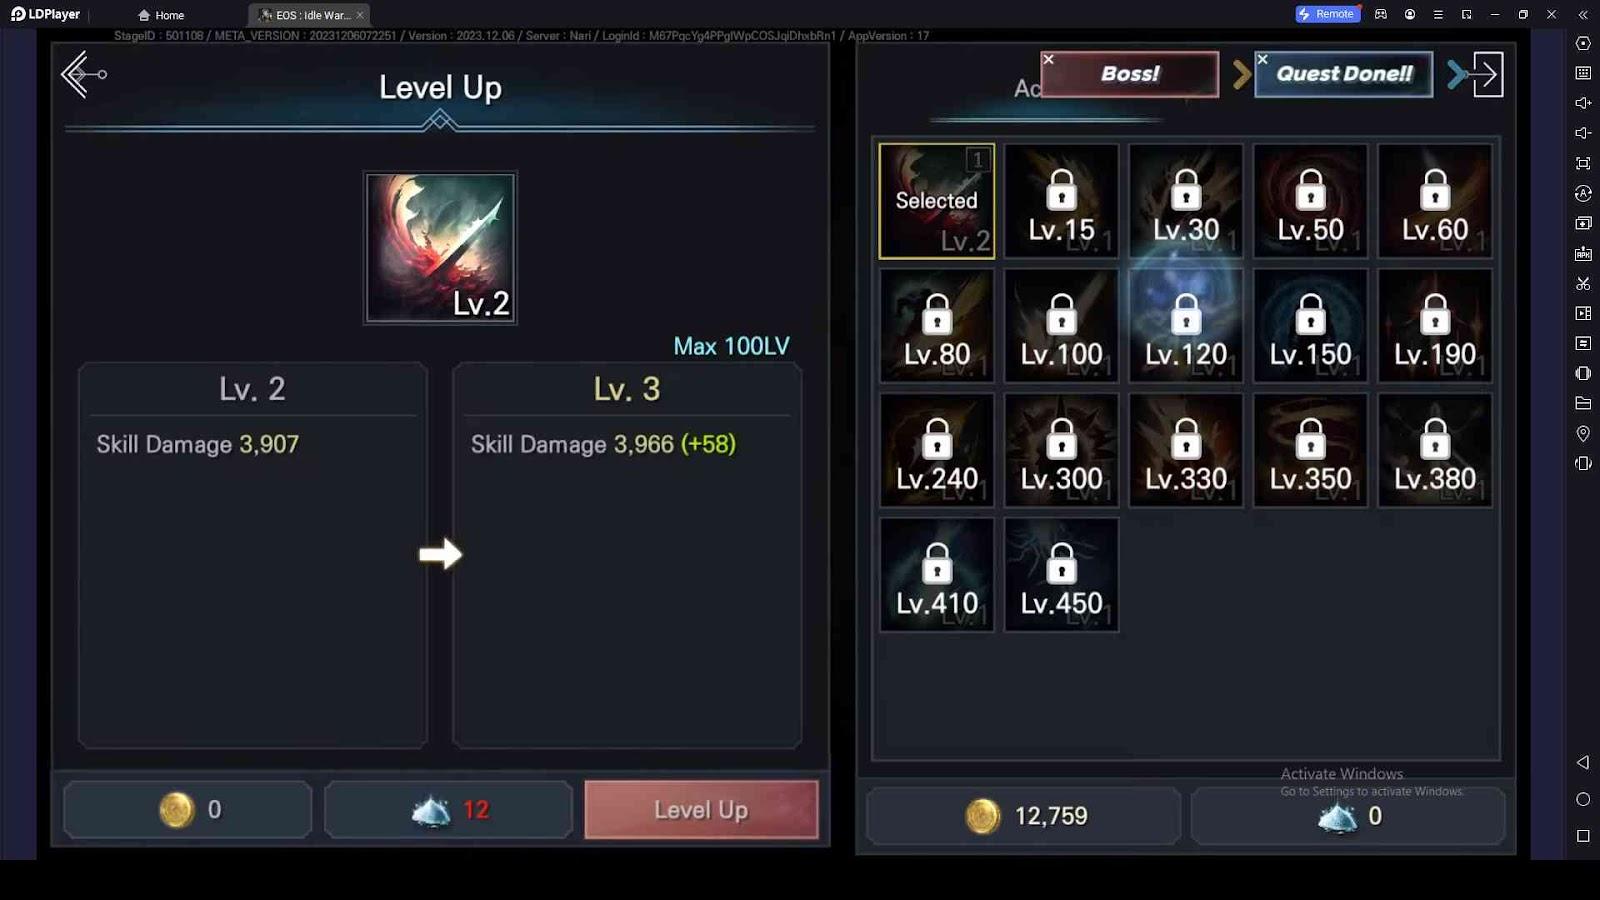 Equip and Upgrade the Best Skills